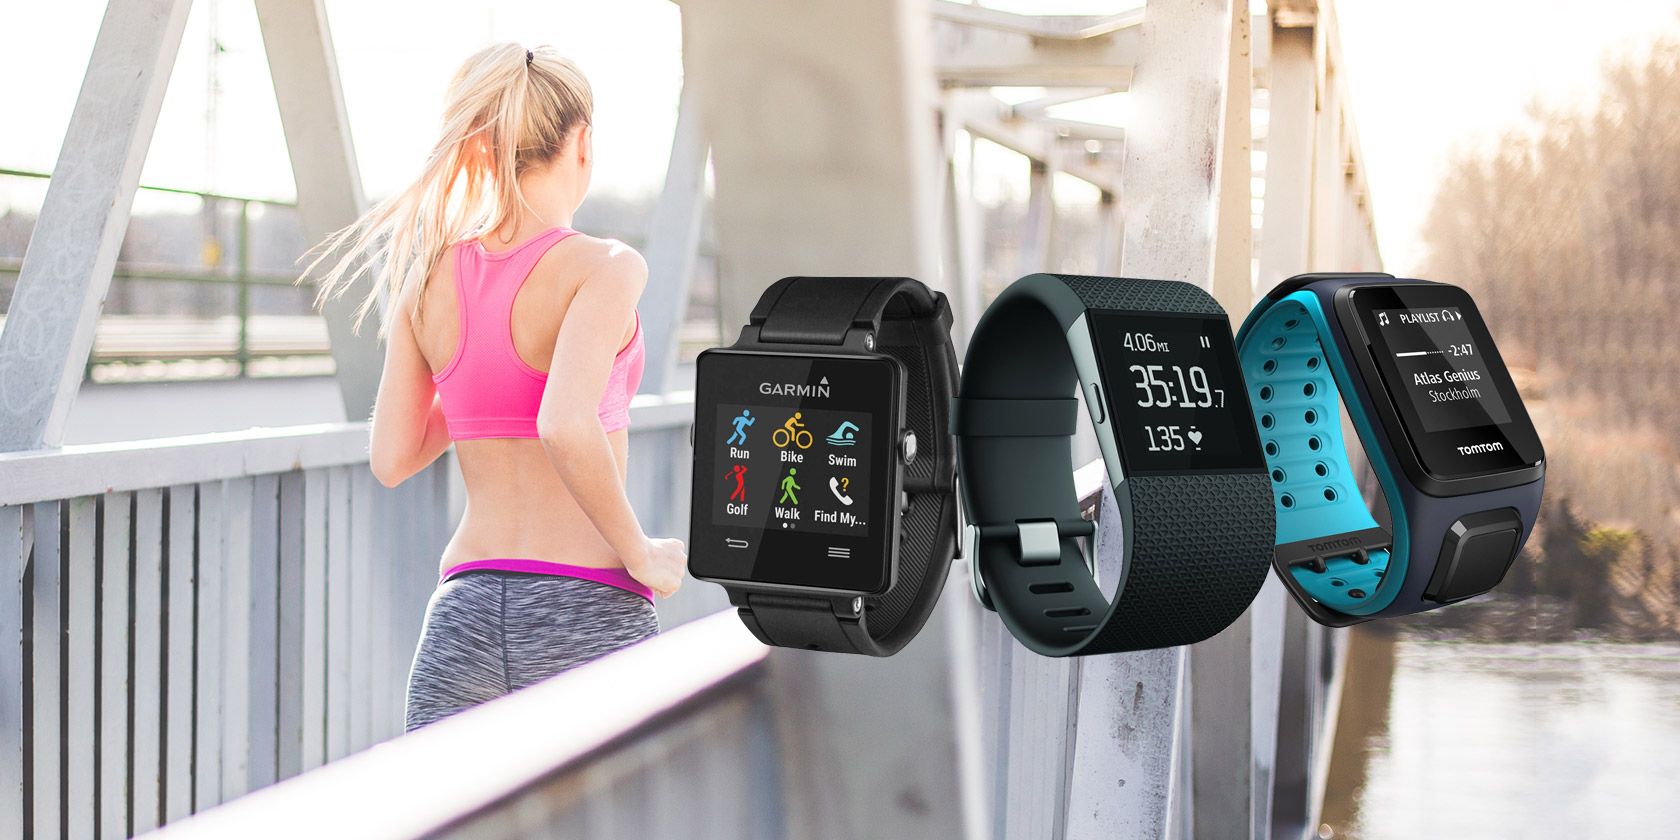 toxiciteit eiland rijk The 7 Best Fitness Trackers